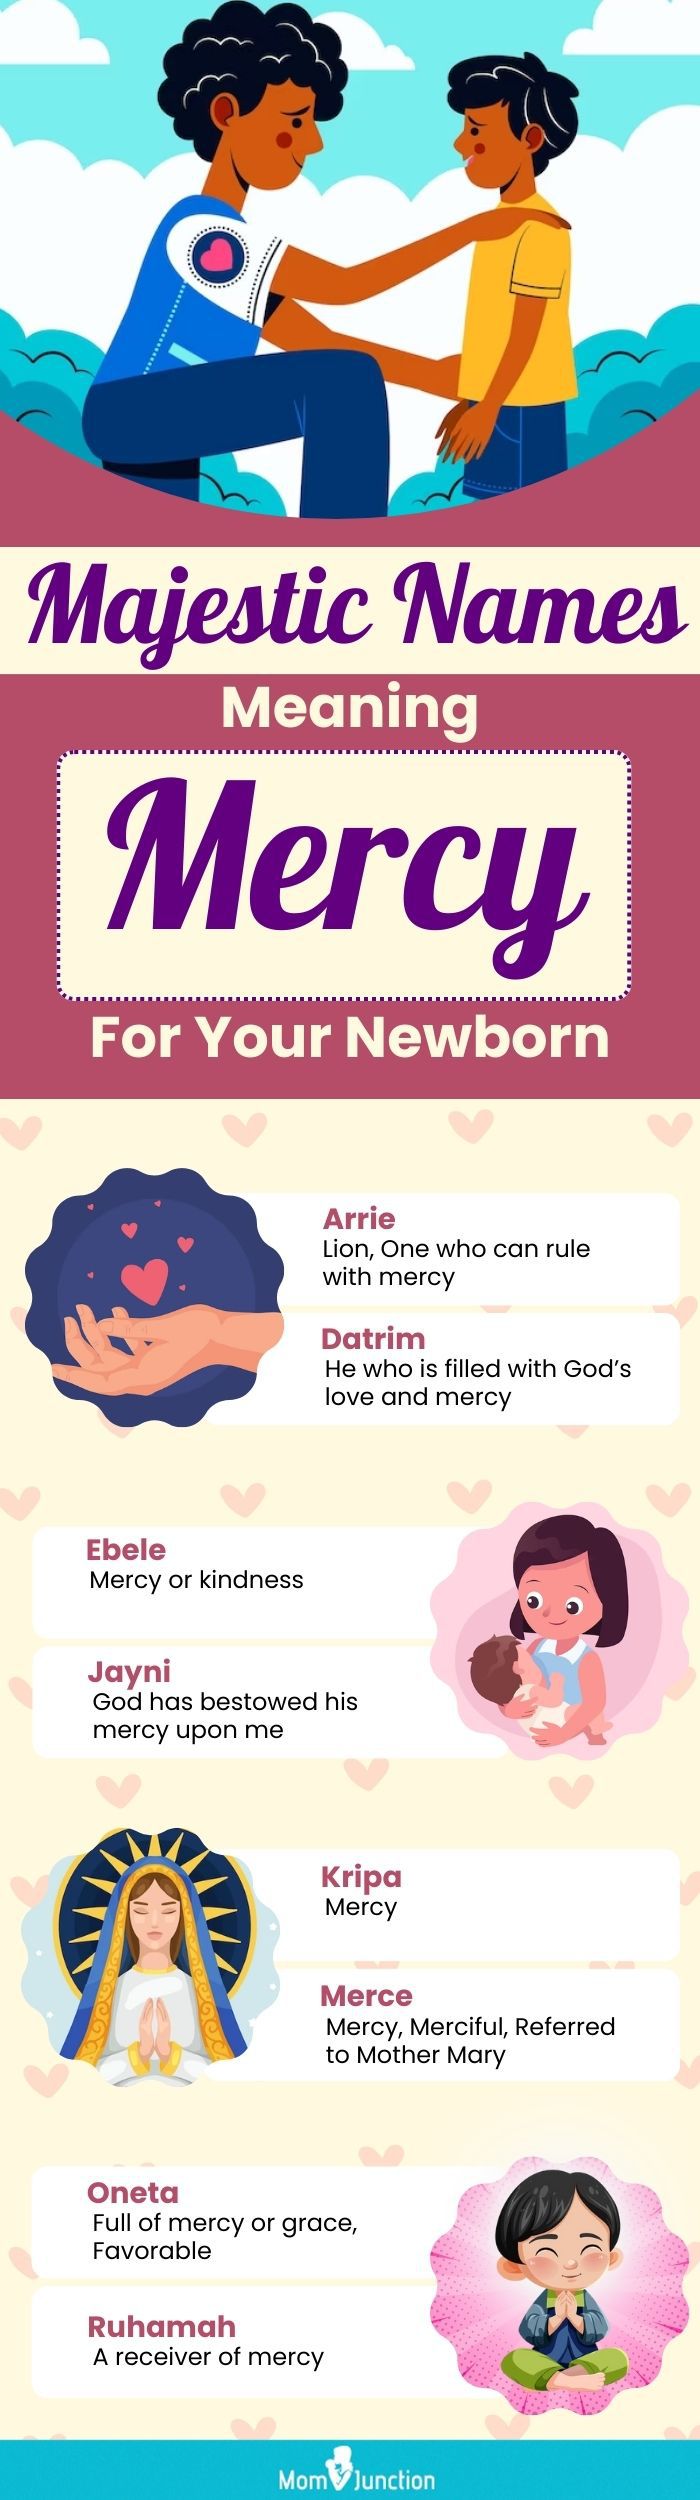 majestic names meaning mercy for your newborn (infographic)